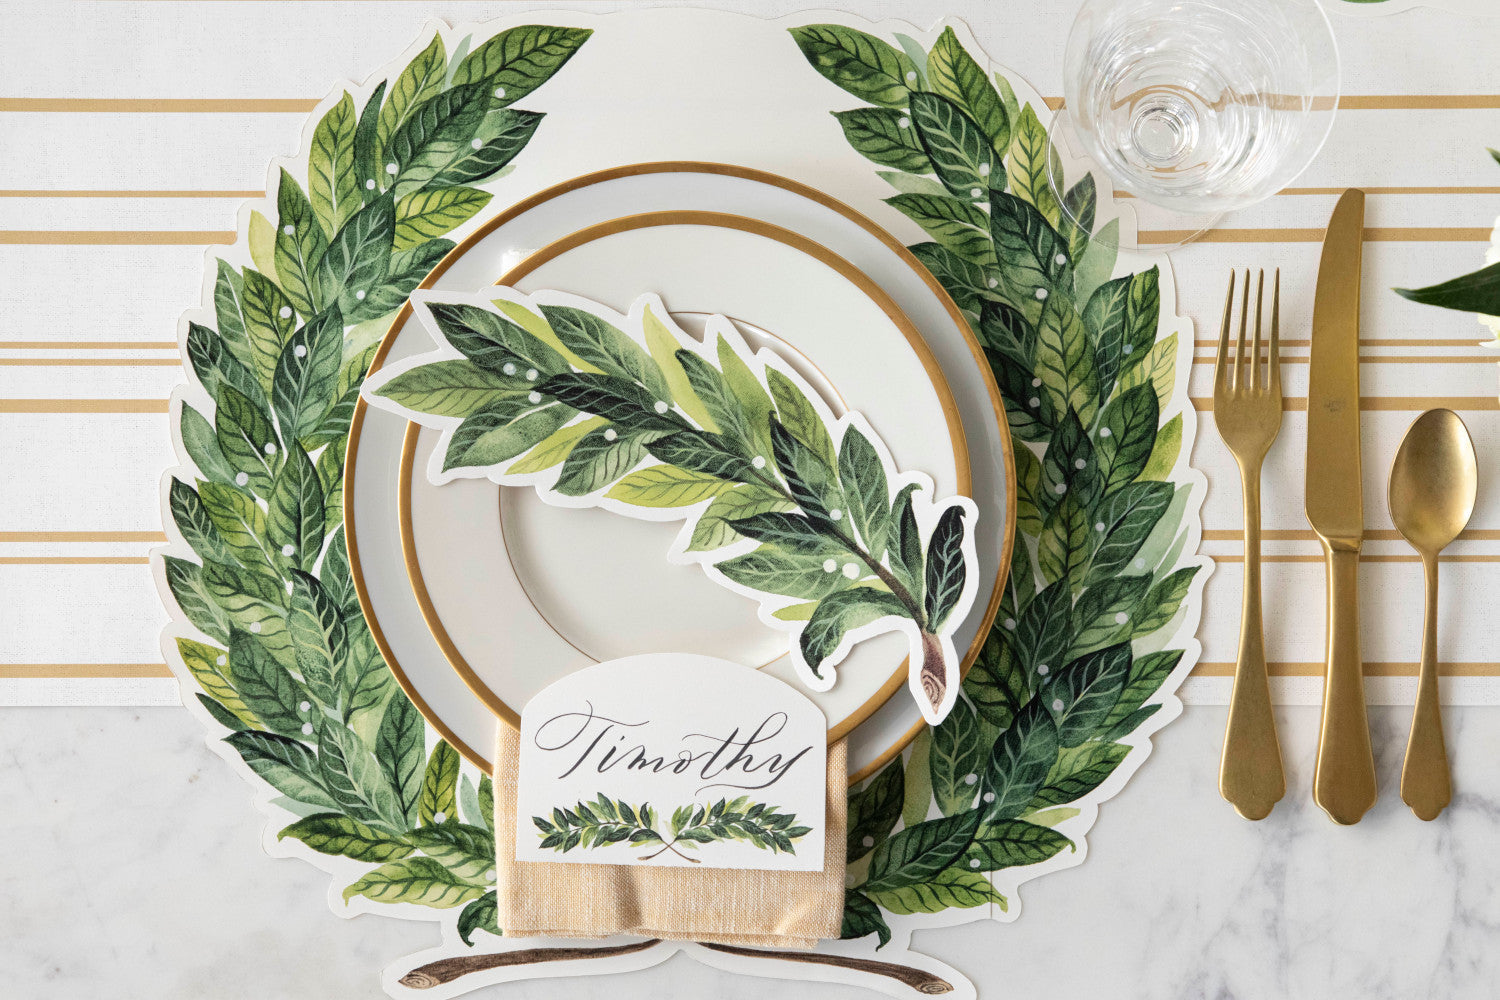 A Die-cut Green Laurel Wreath Placemat by Hester &amp; Cook on a white table.